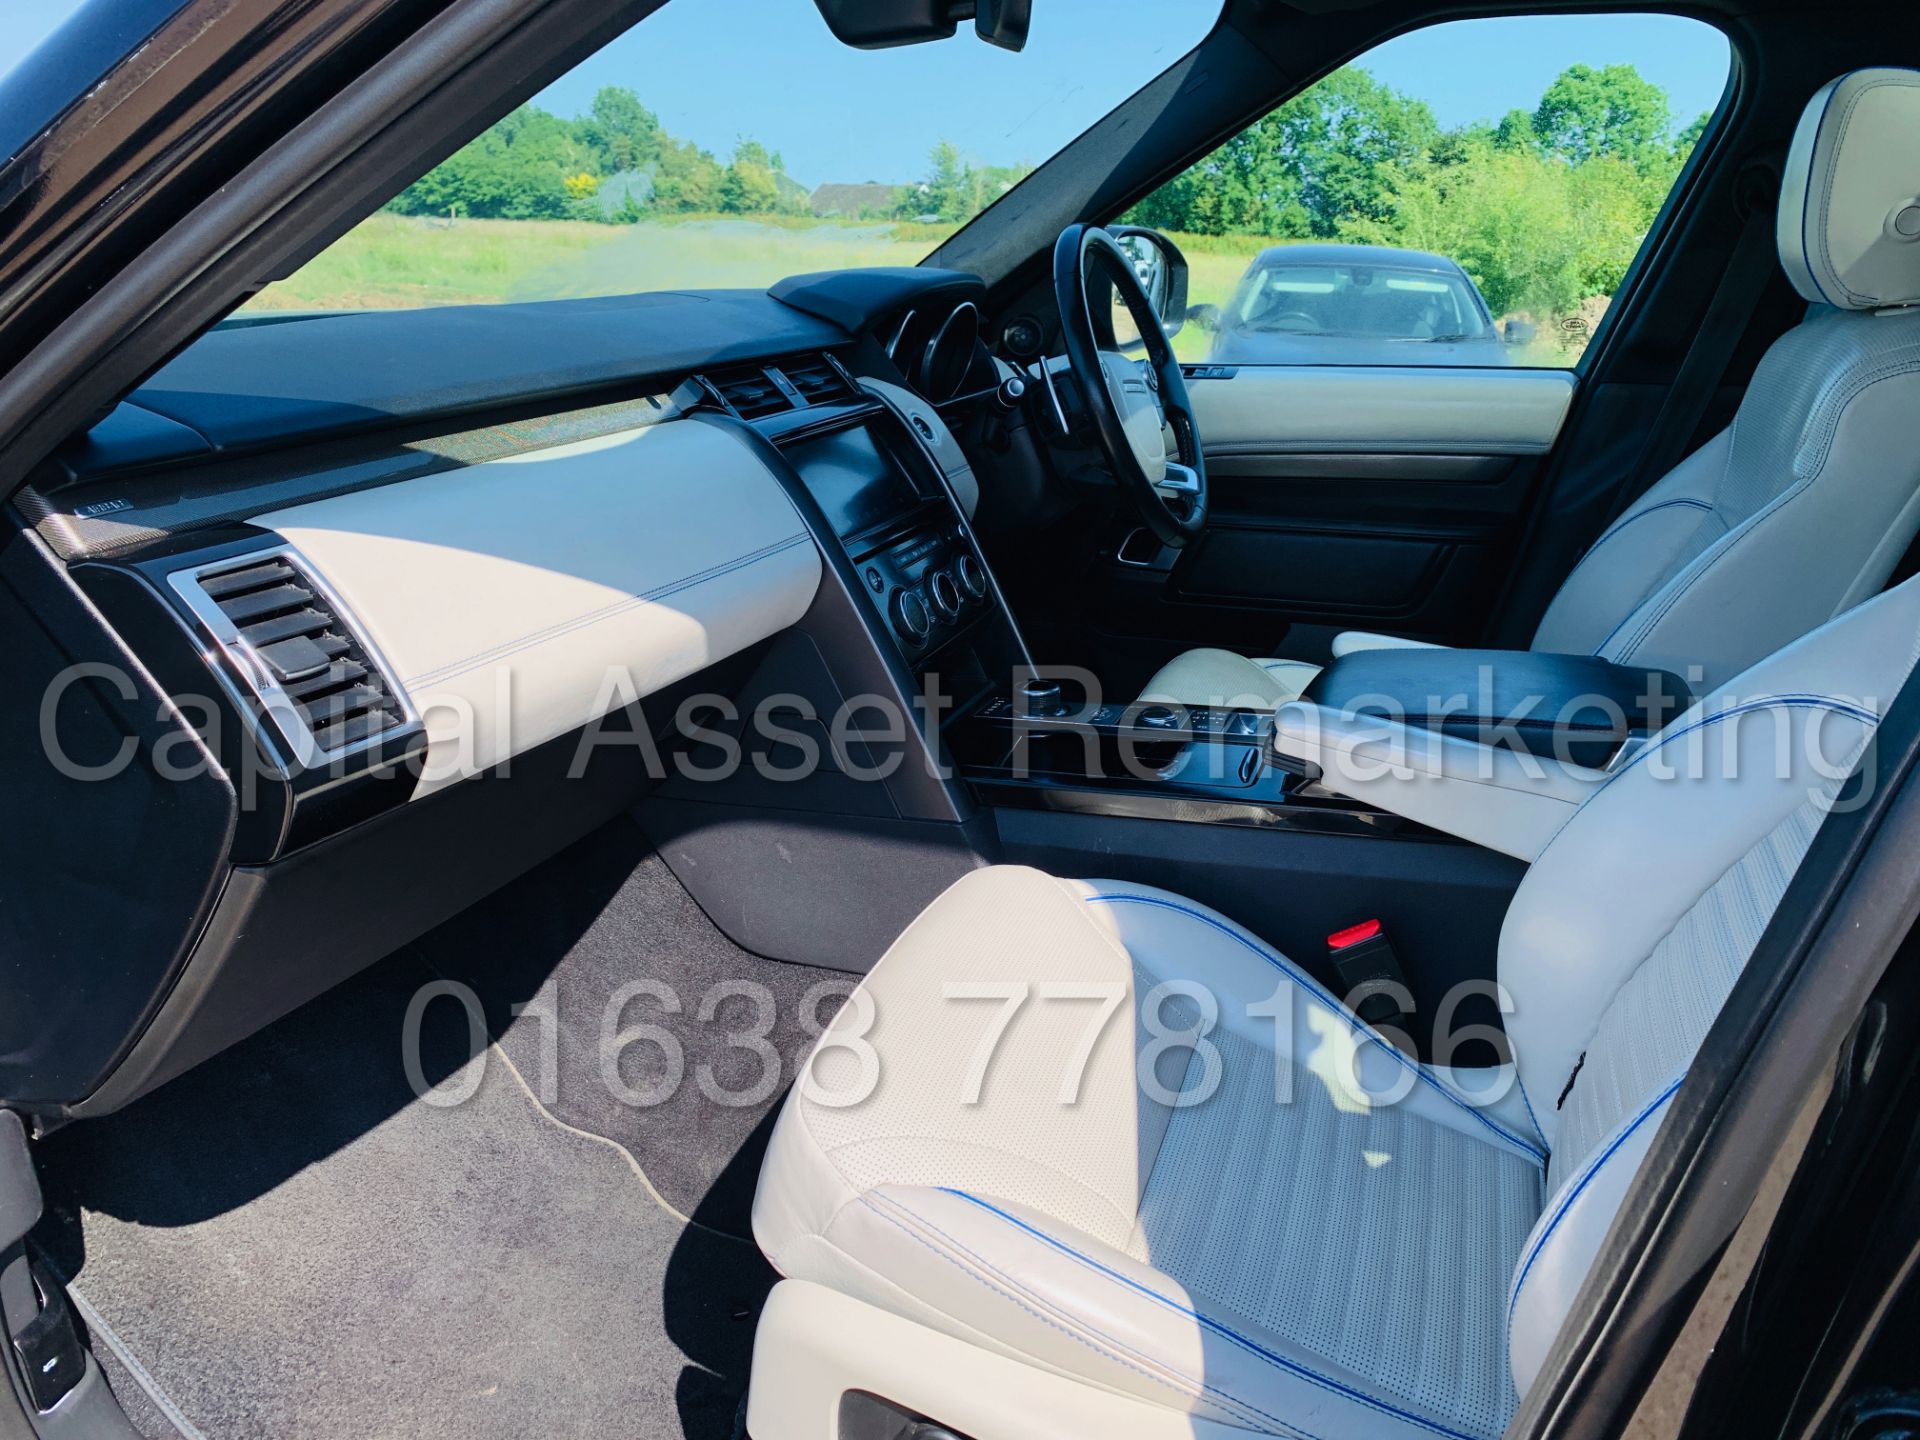 LAND ROVER DISCOVERY *HSE Dynamic* 7 SEATER SUV (2018 - NEW MODEL) '3.0 TD6 - 258 BHP -8 SPEED AUTO' - Image 26 of 68